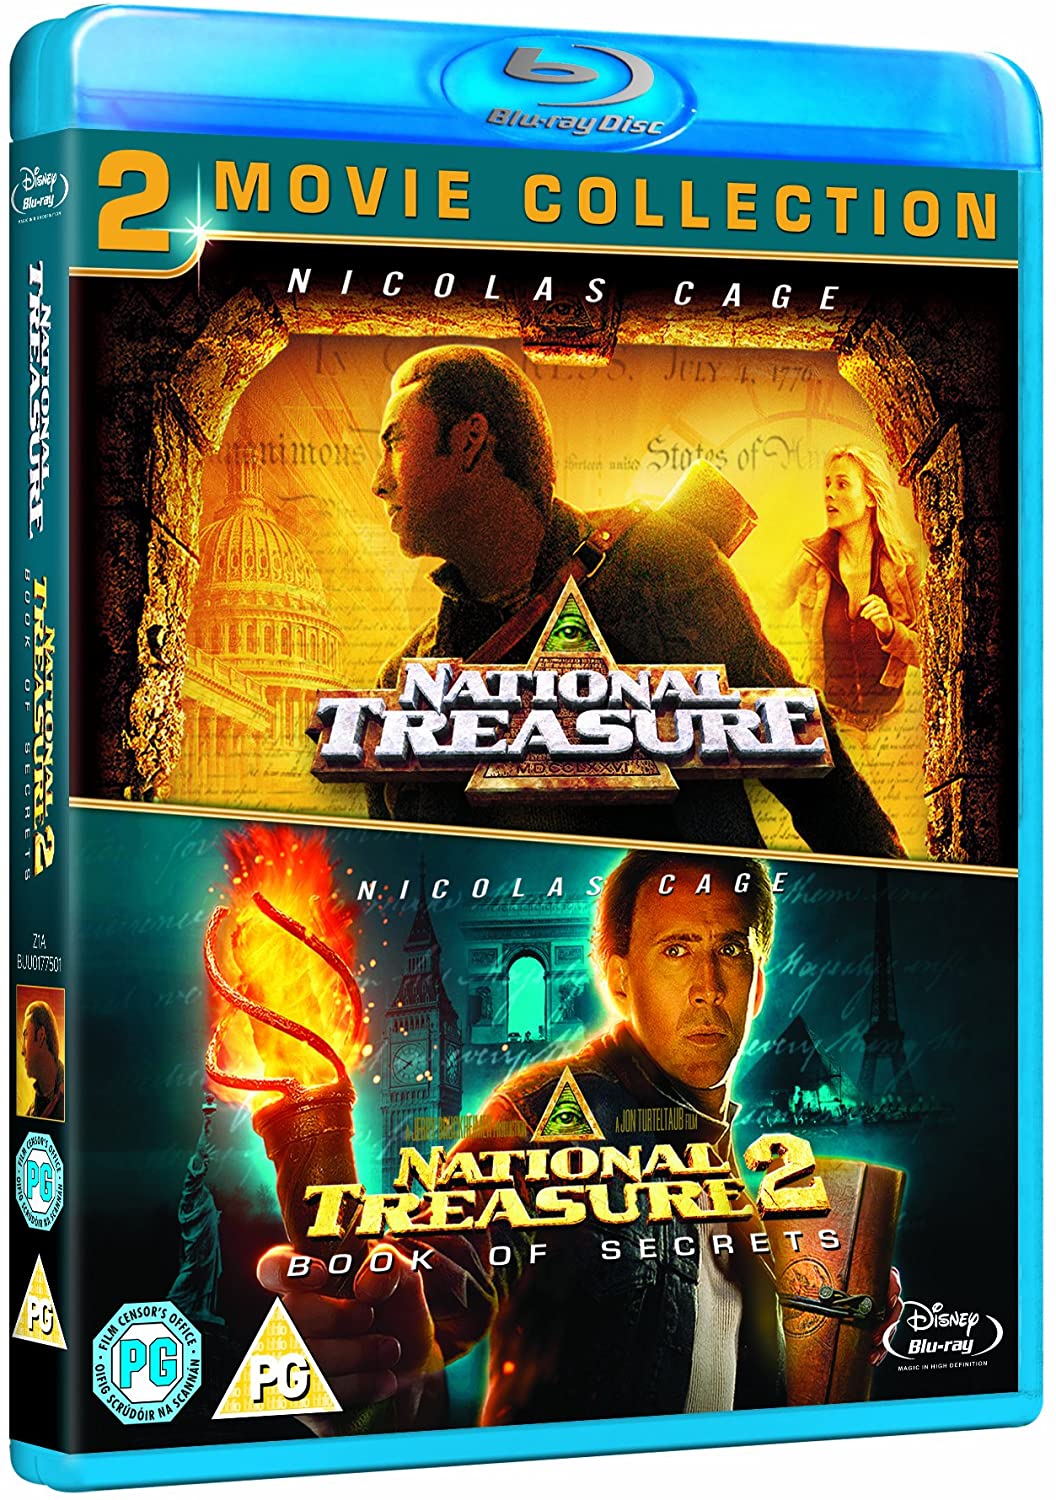 National Treasure 1 & 2 Double Pack [Region Free] - Action/Adventure [Blu-ray]